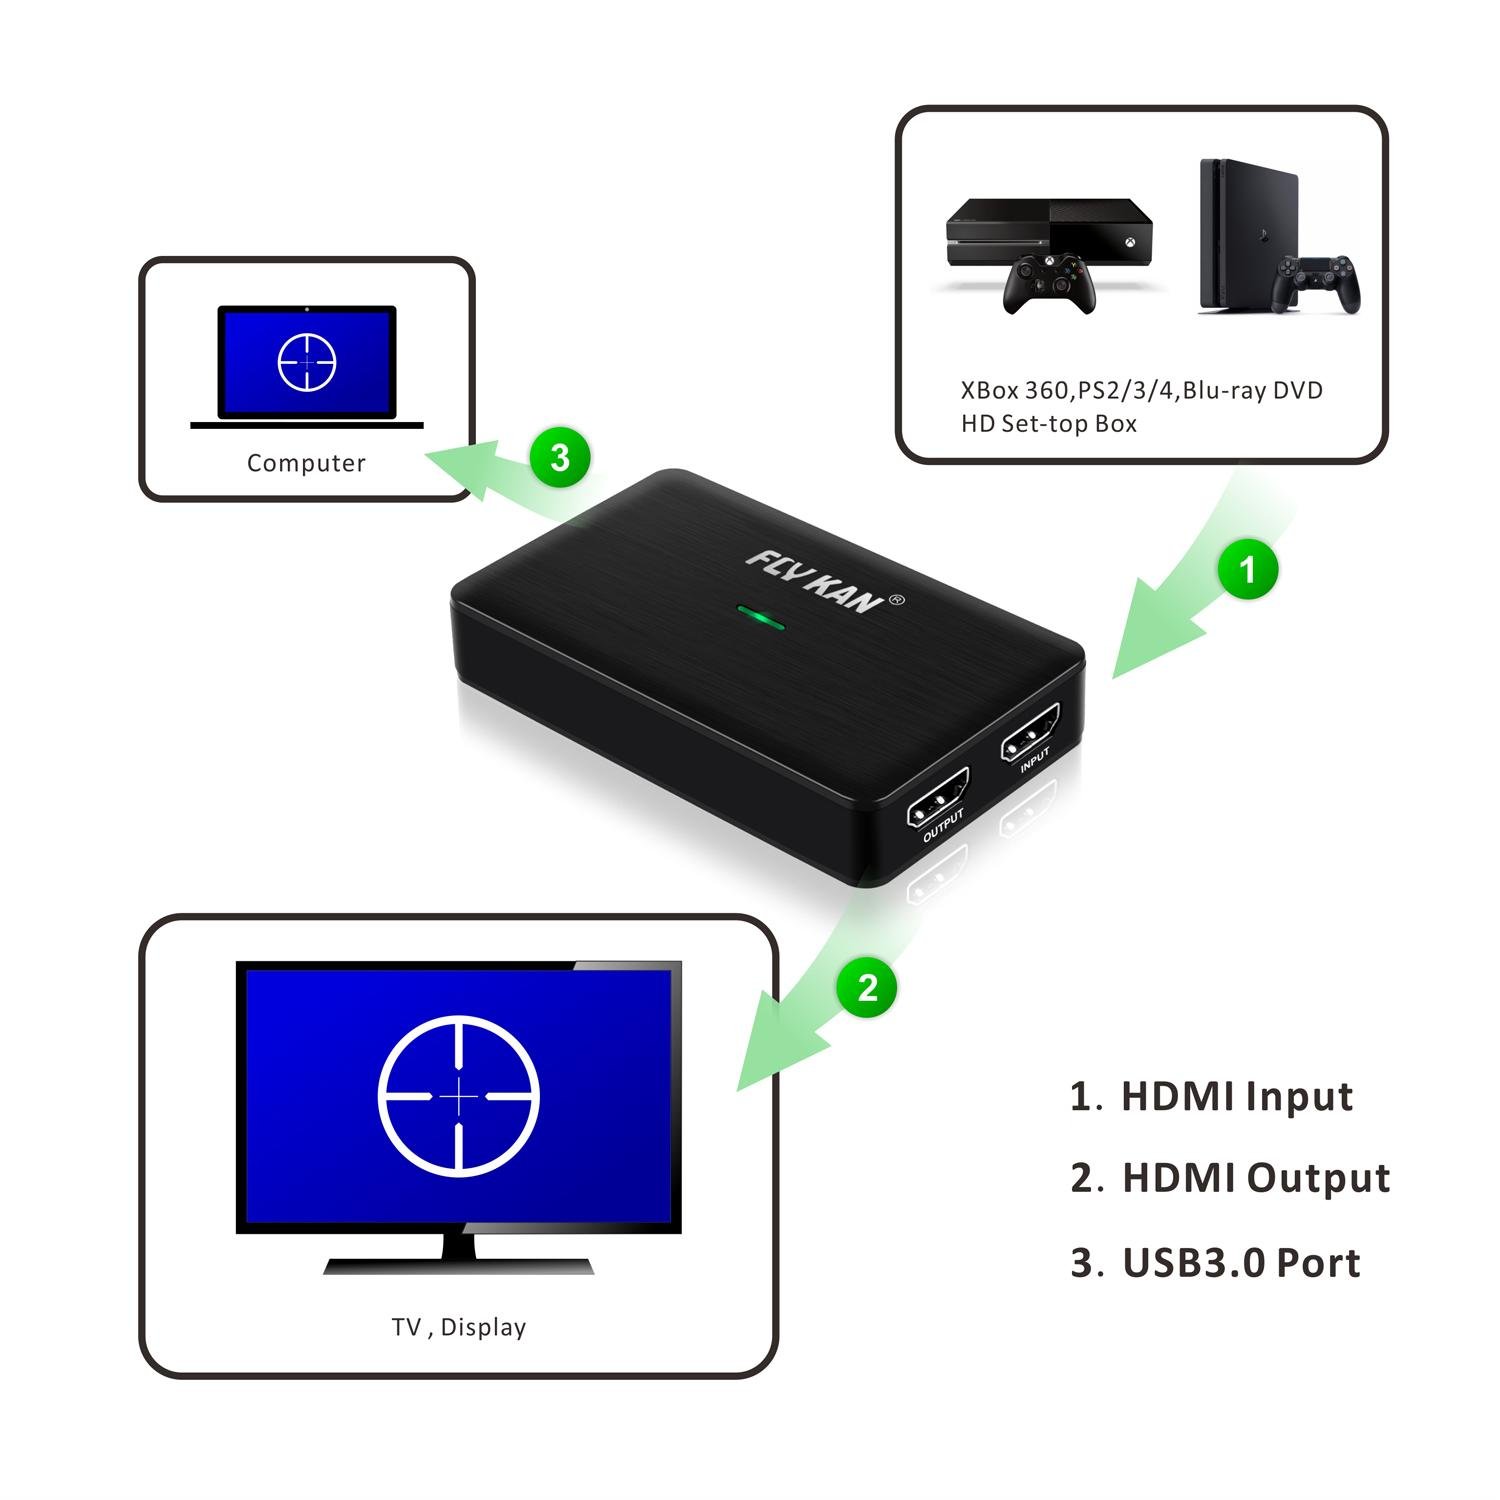 HDMI to USB3.0 Game recorder box for PS4 2